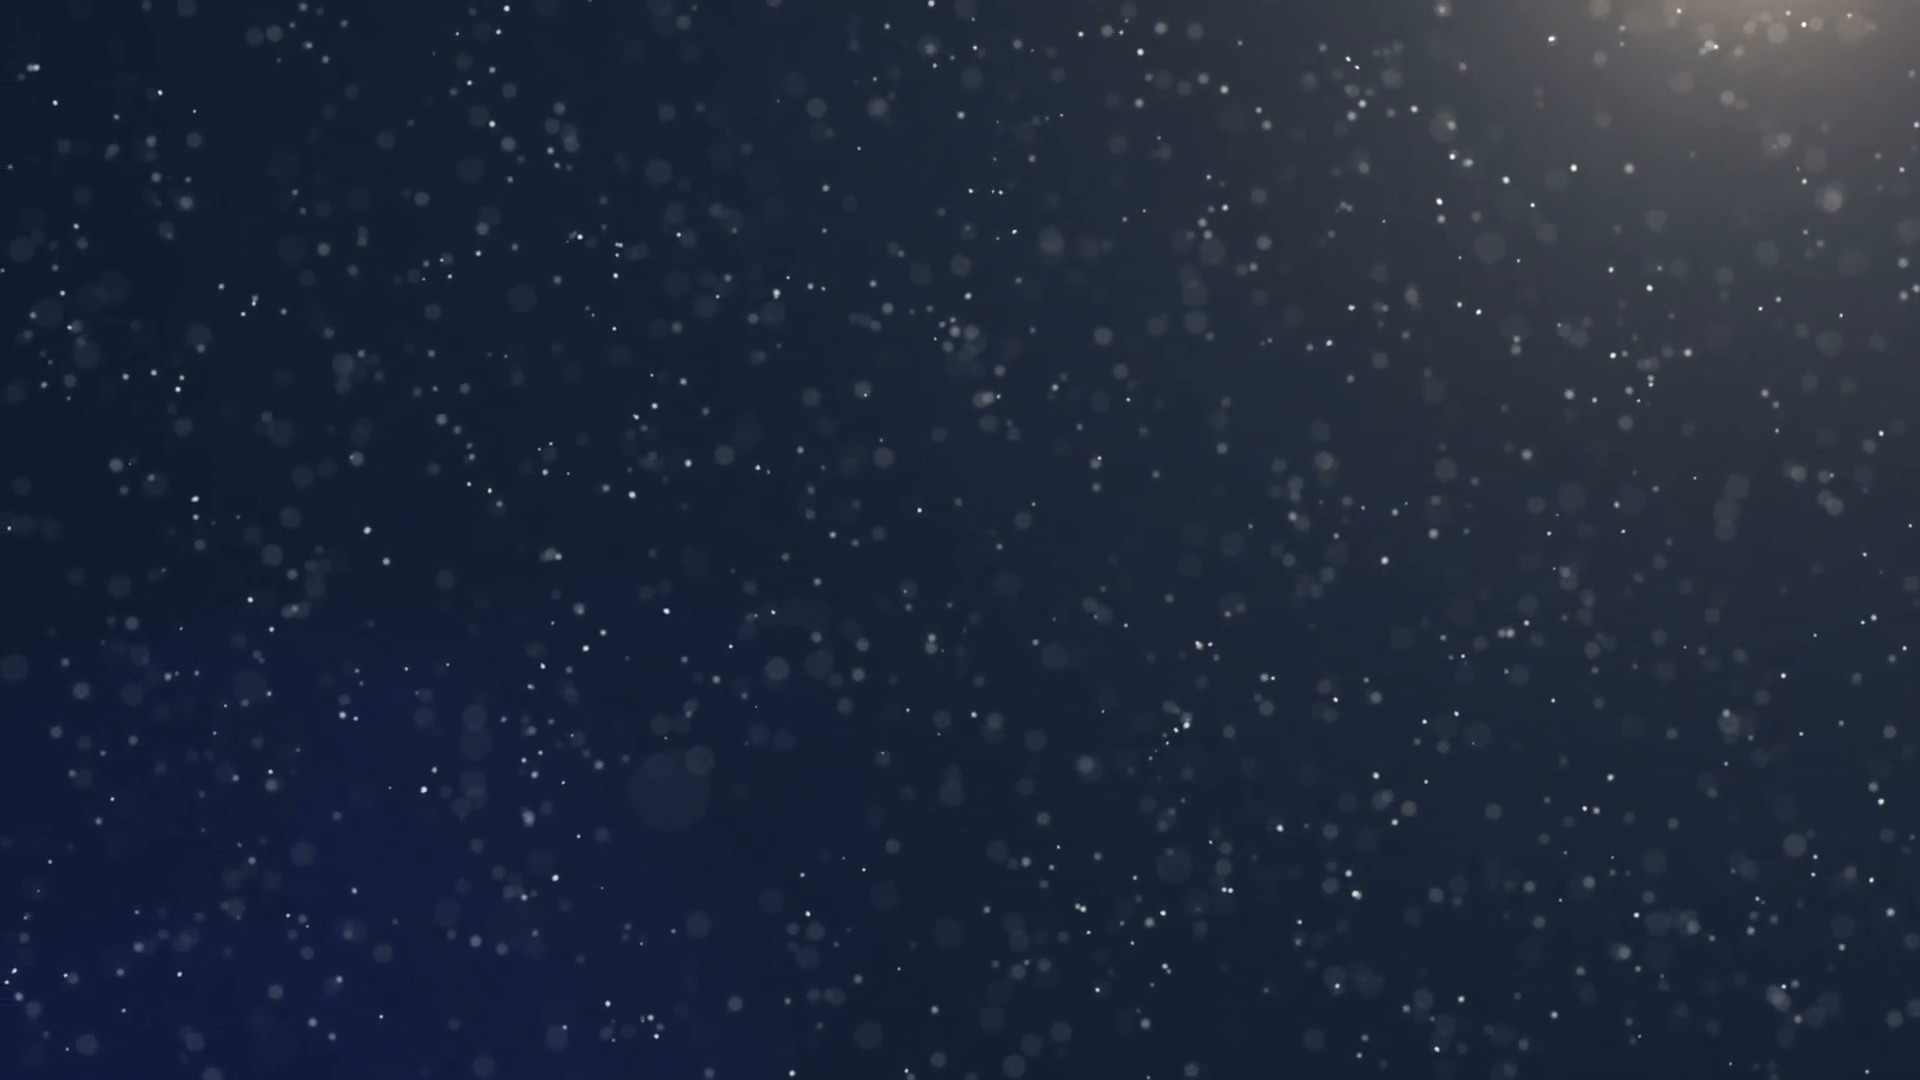 1920x1080 Subscription Library High Number of Dust Particles Moving Slowly in Sun  Flare, Dark Blue Background